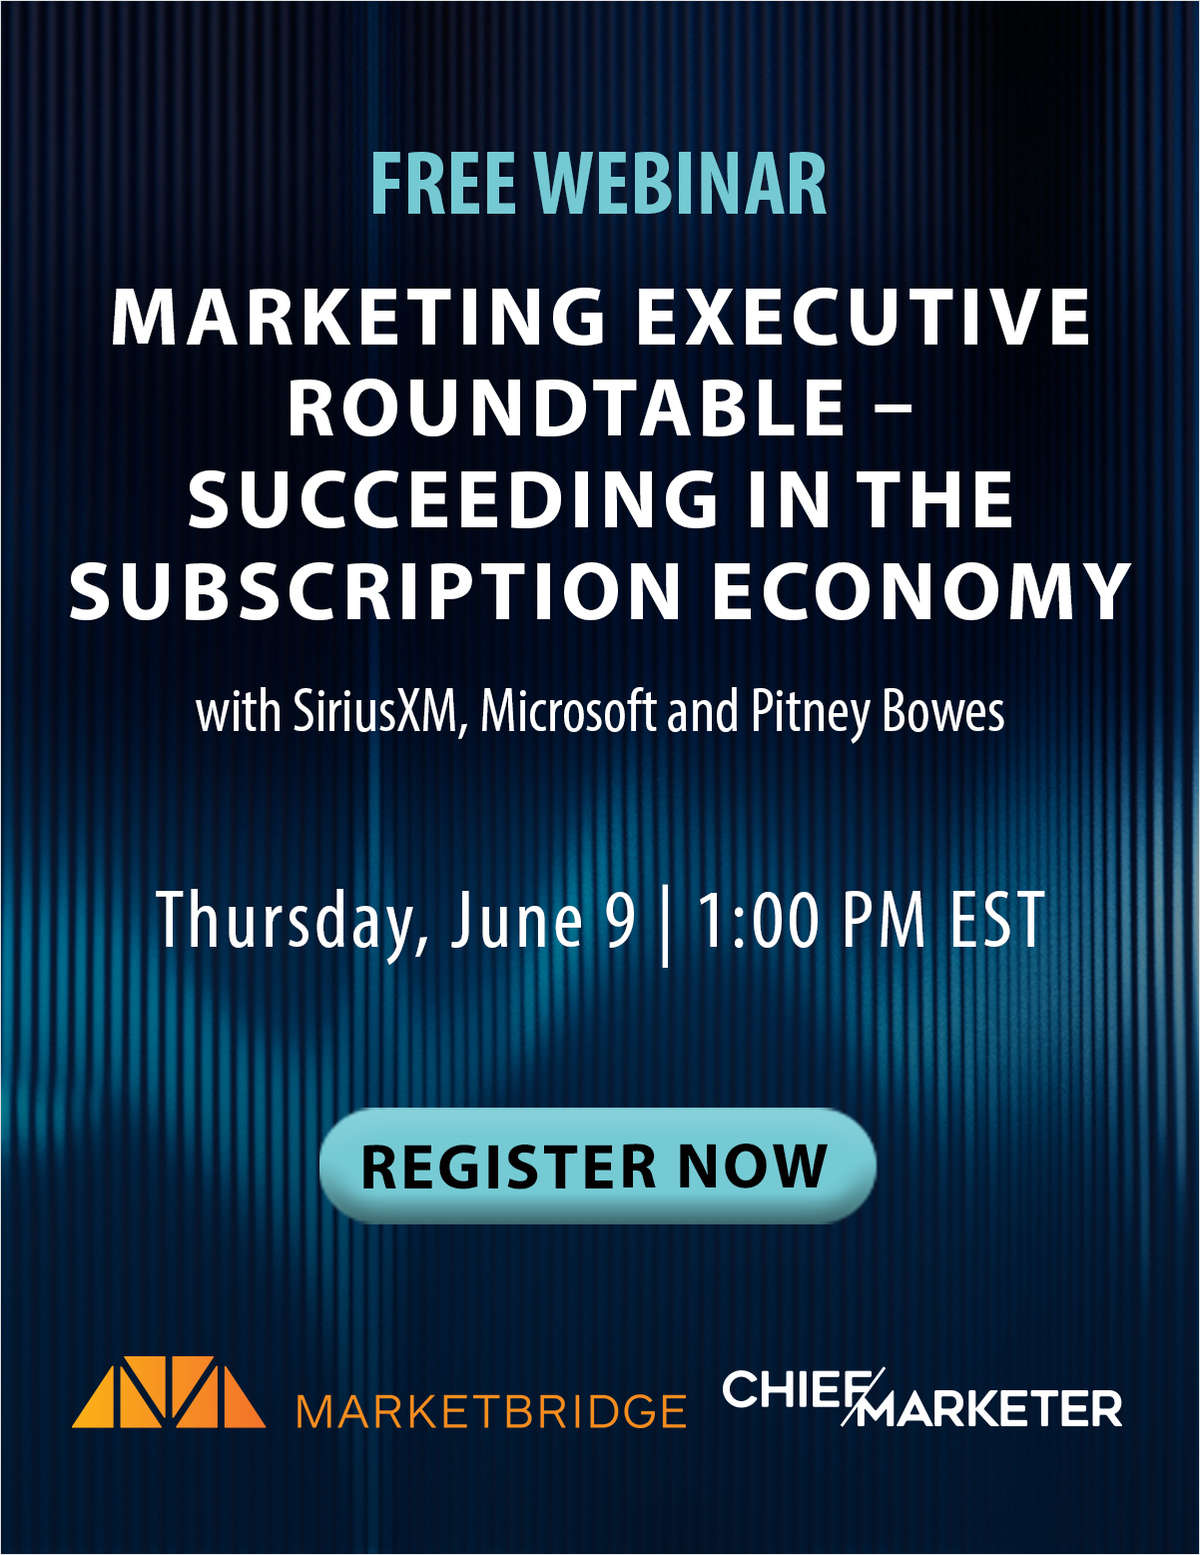 Marketing Executive Roundtable -- Succeeding in the Subscription Economy